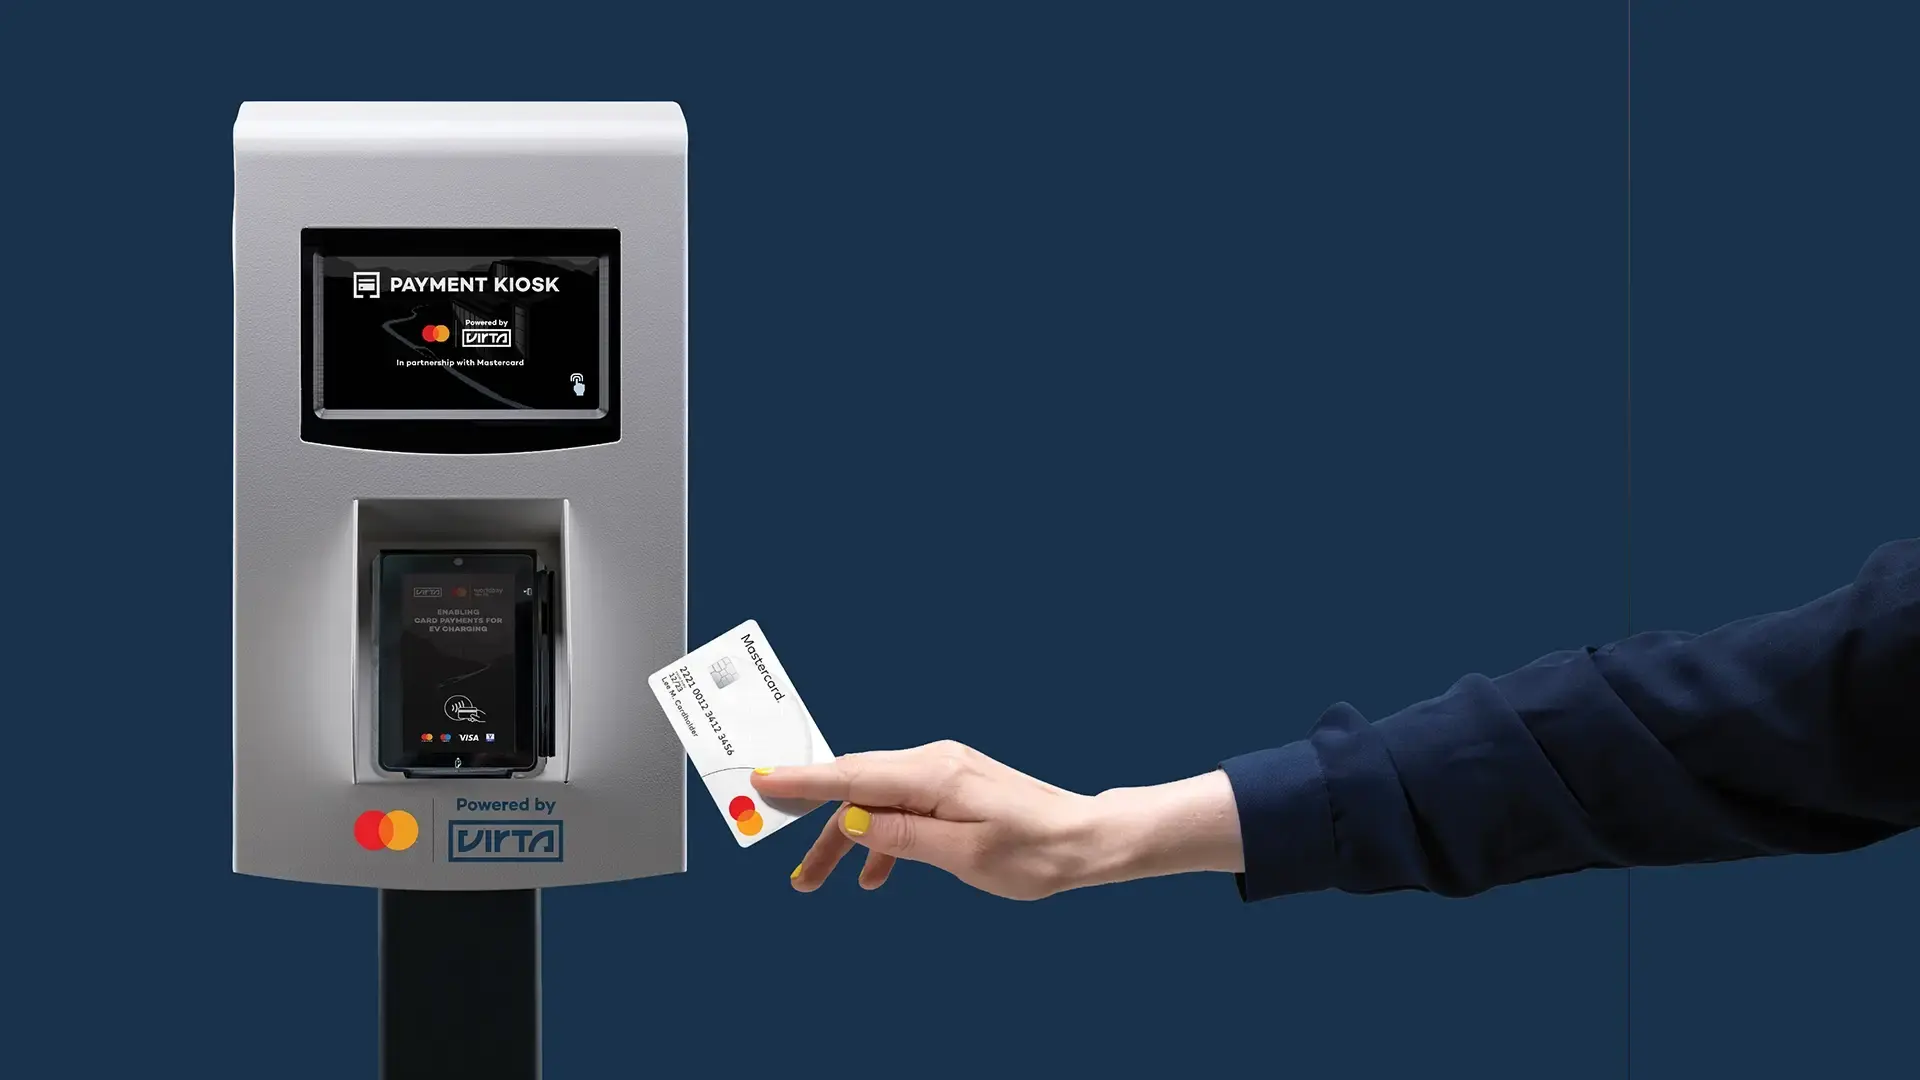 Payment Kiosk and hand with payment card